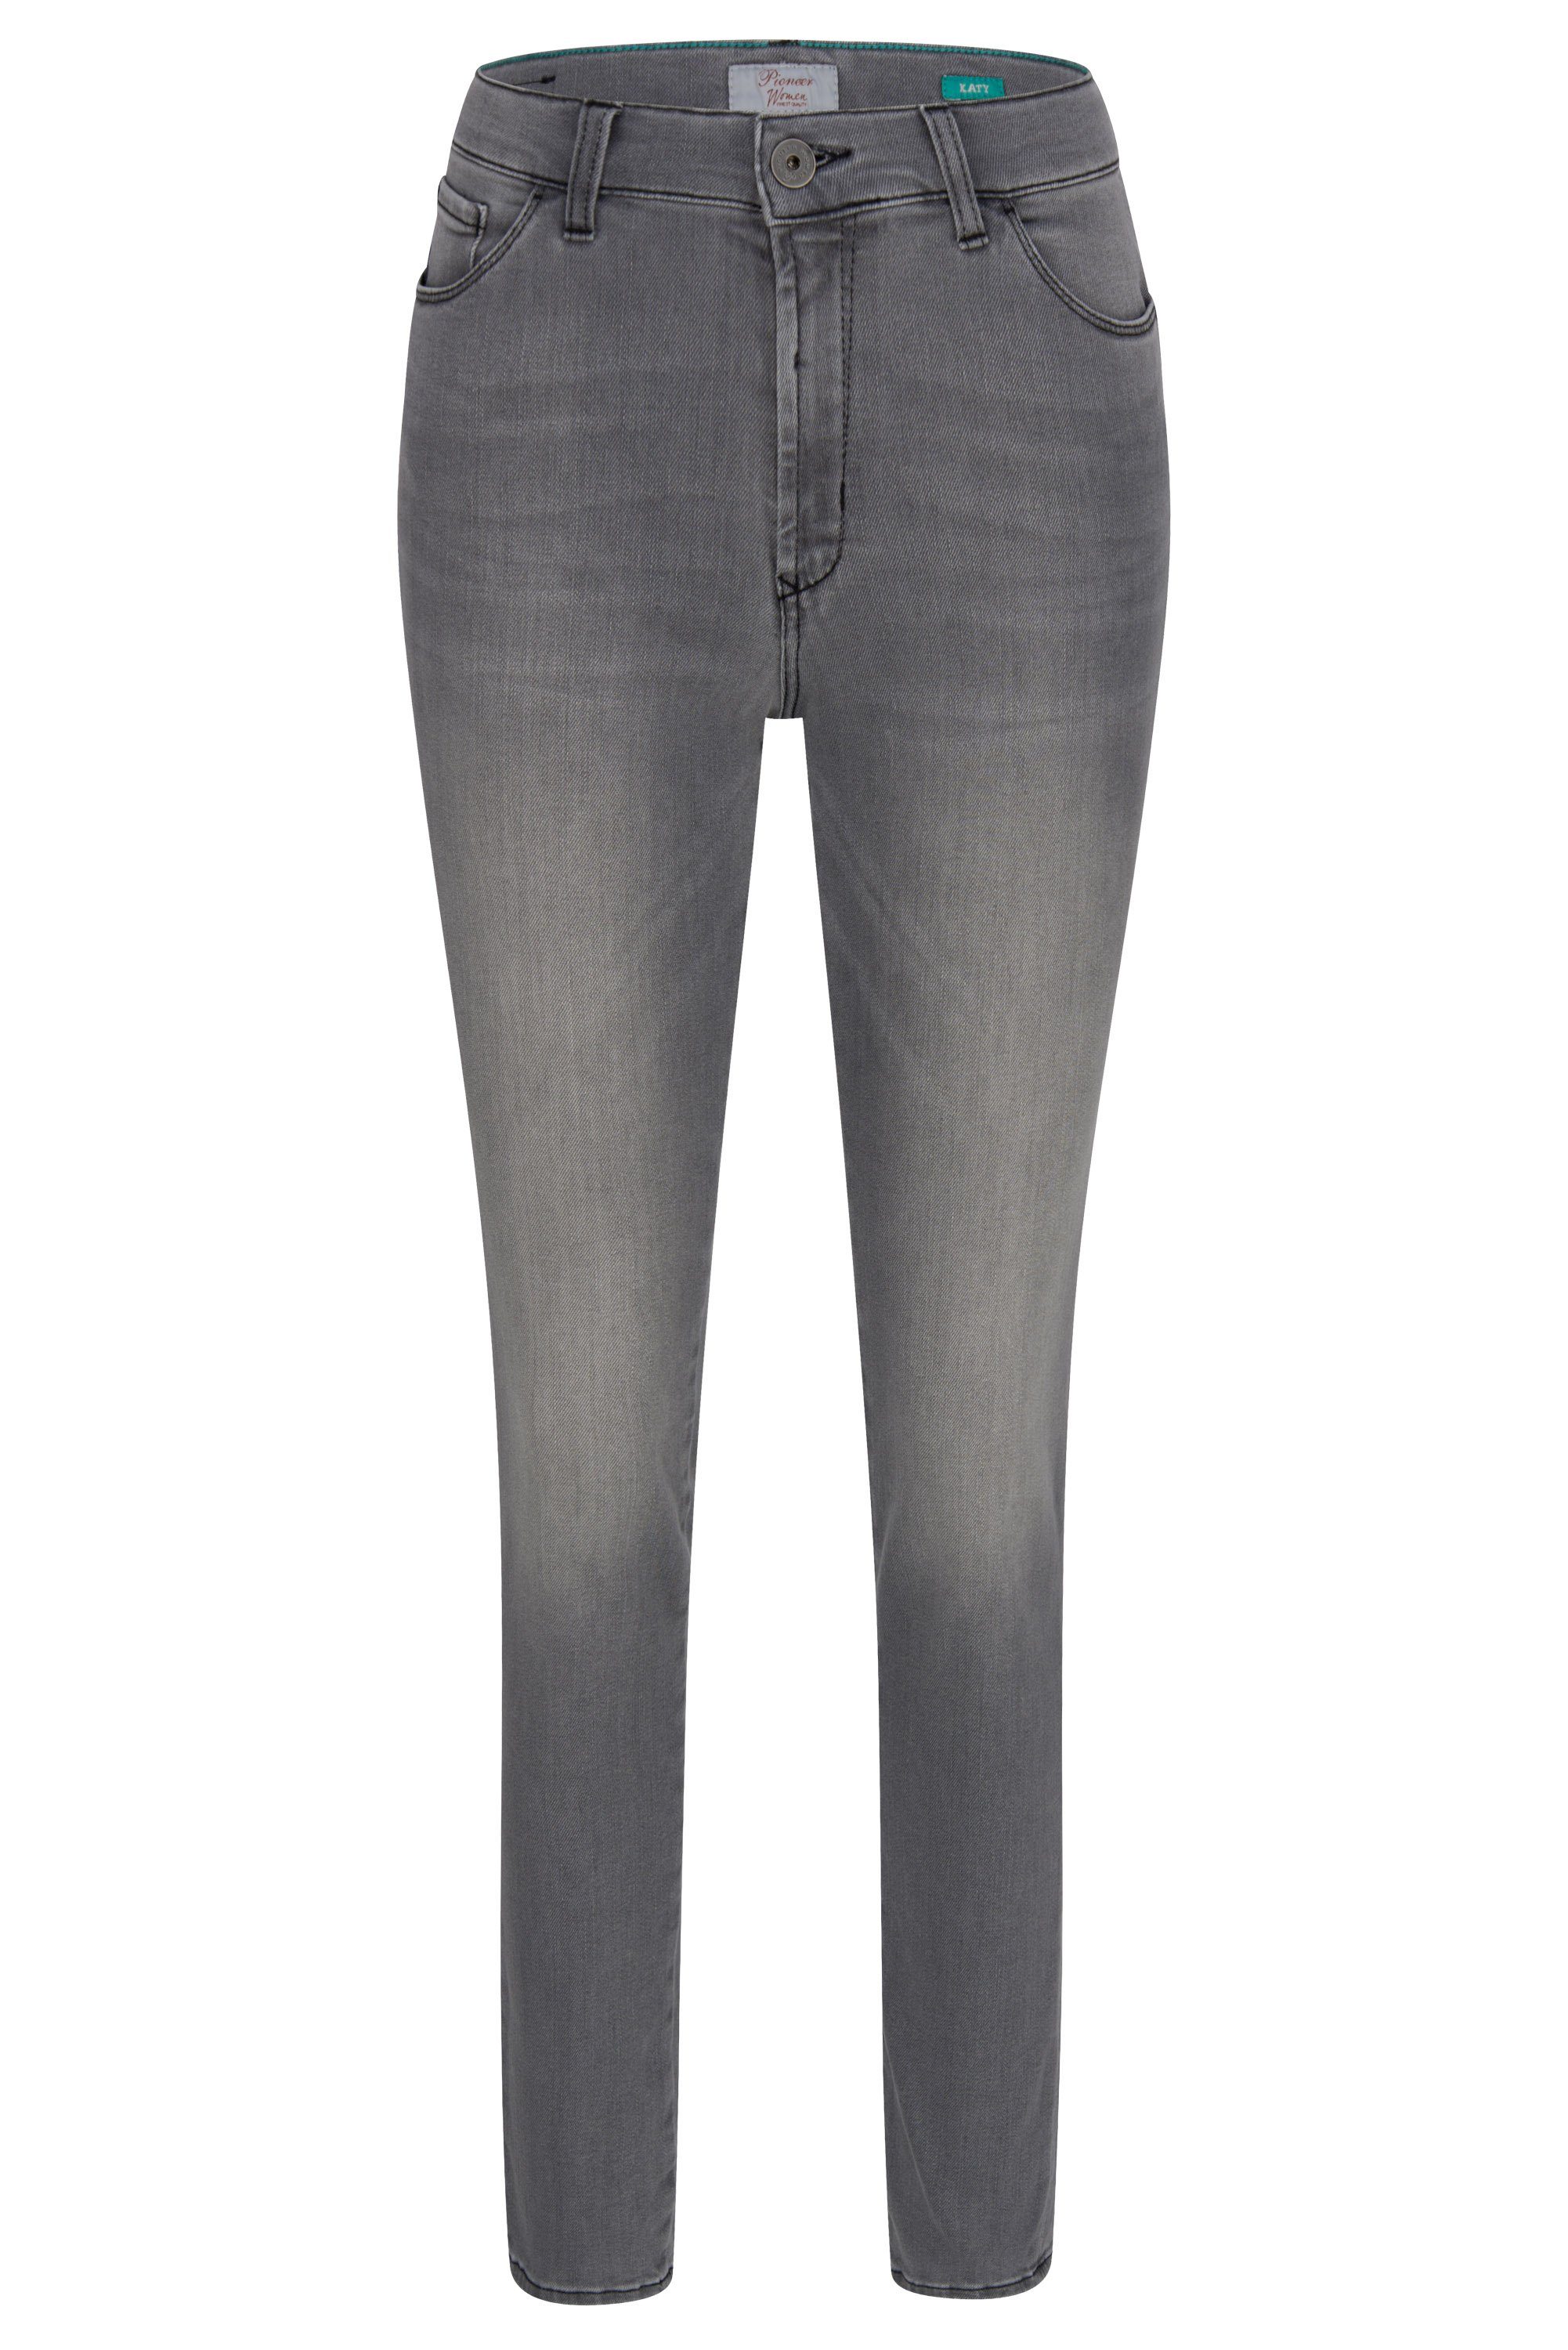 grey buffies KATY Pioneer Authentic PIONEER Stretch-Jeans 3011 - POWERSTRETCH used 5012.9834 Jeans